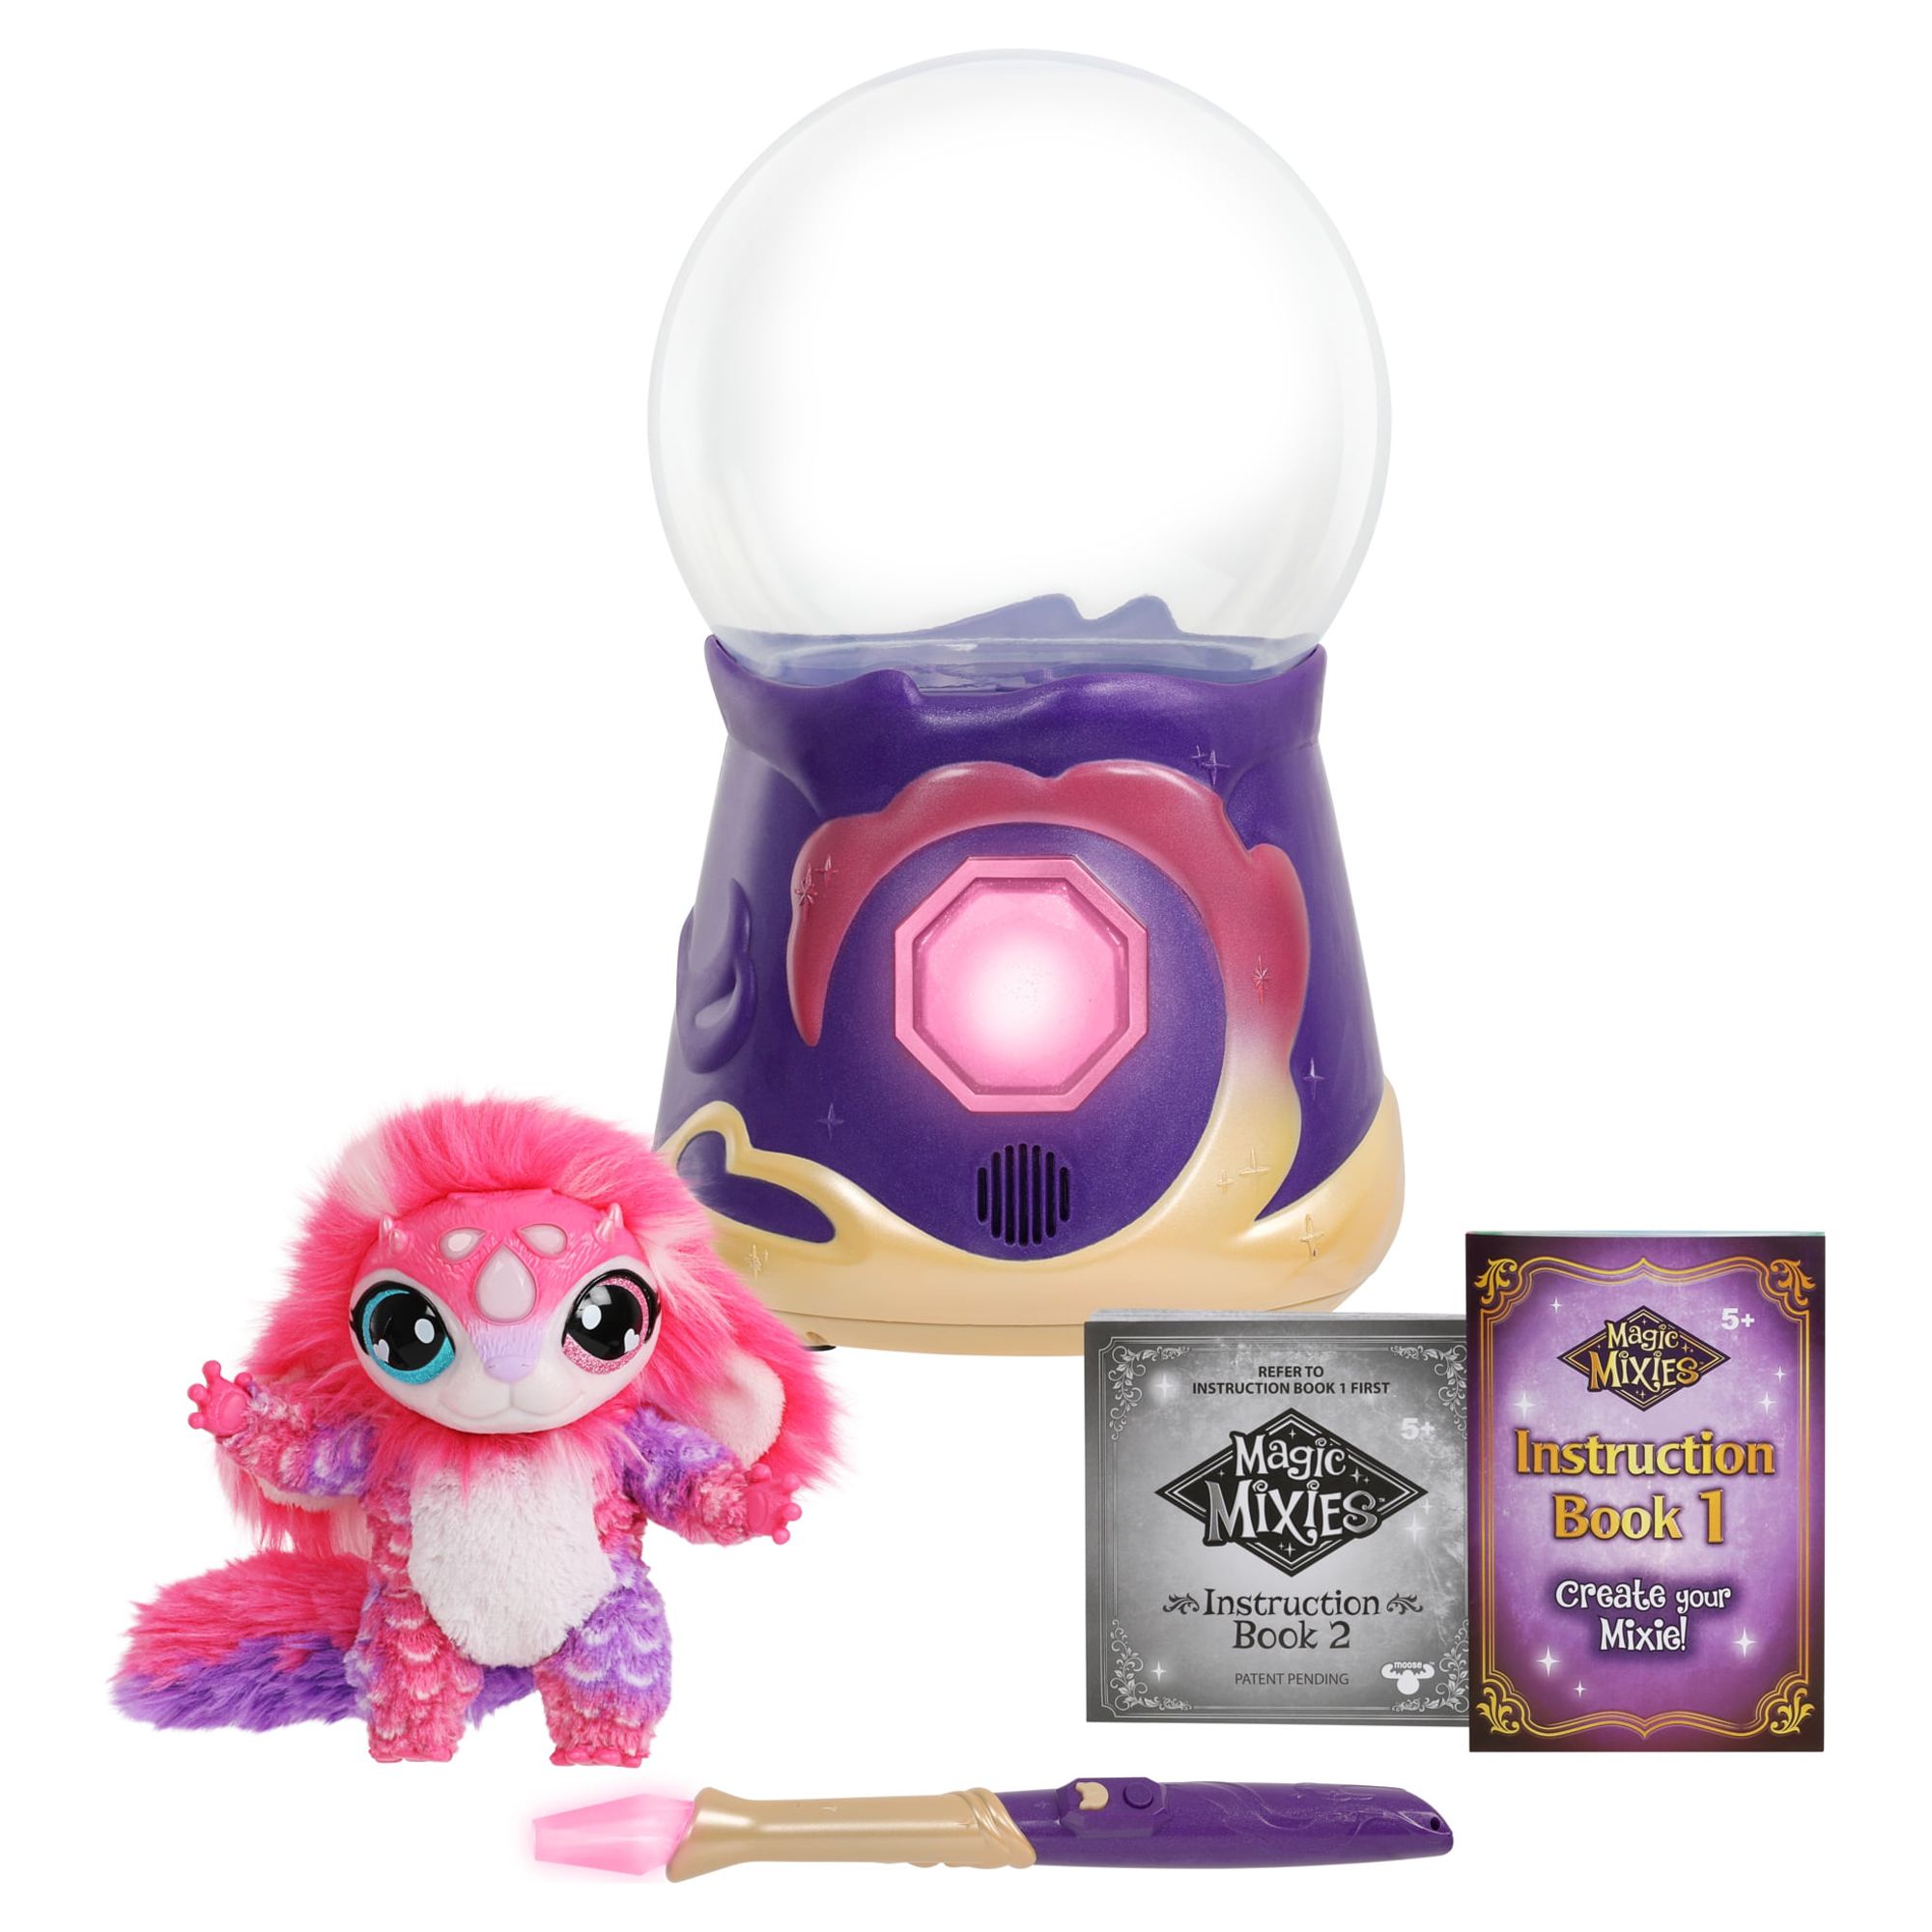 Magic Mixies Magical Misting Crystal Ball with Interactive 8 inch Pink Plush Toy Ages 5+ - image 1 of 18